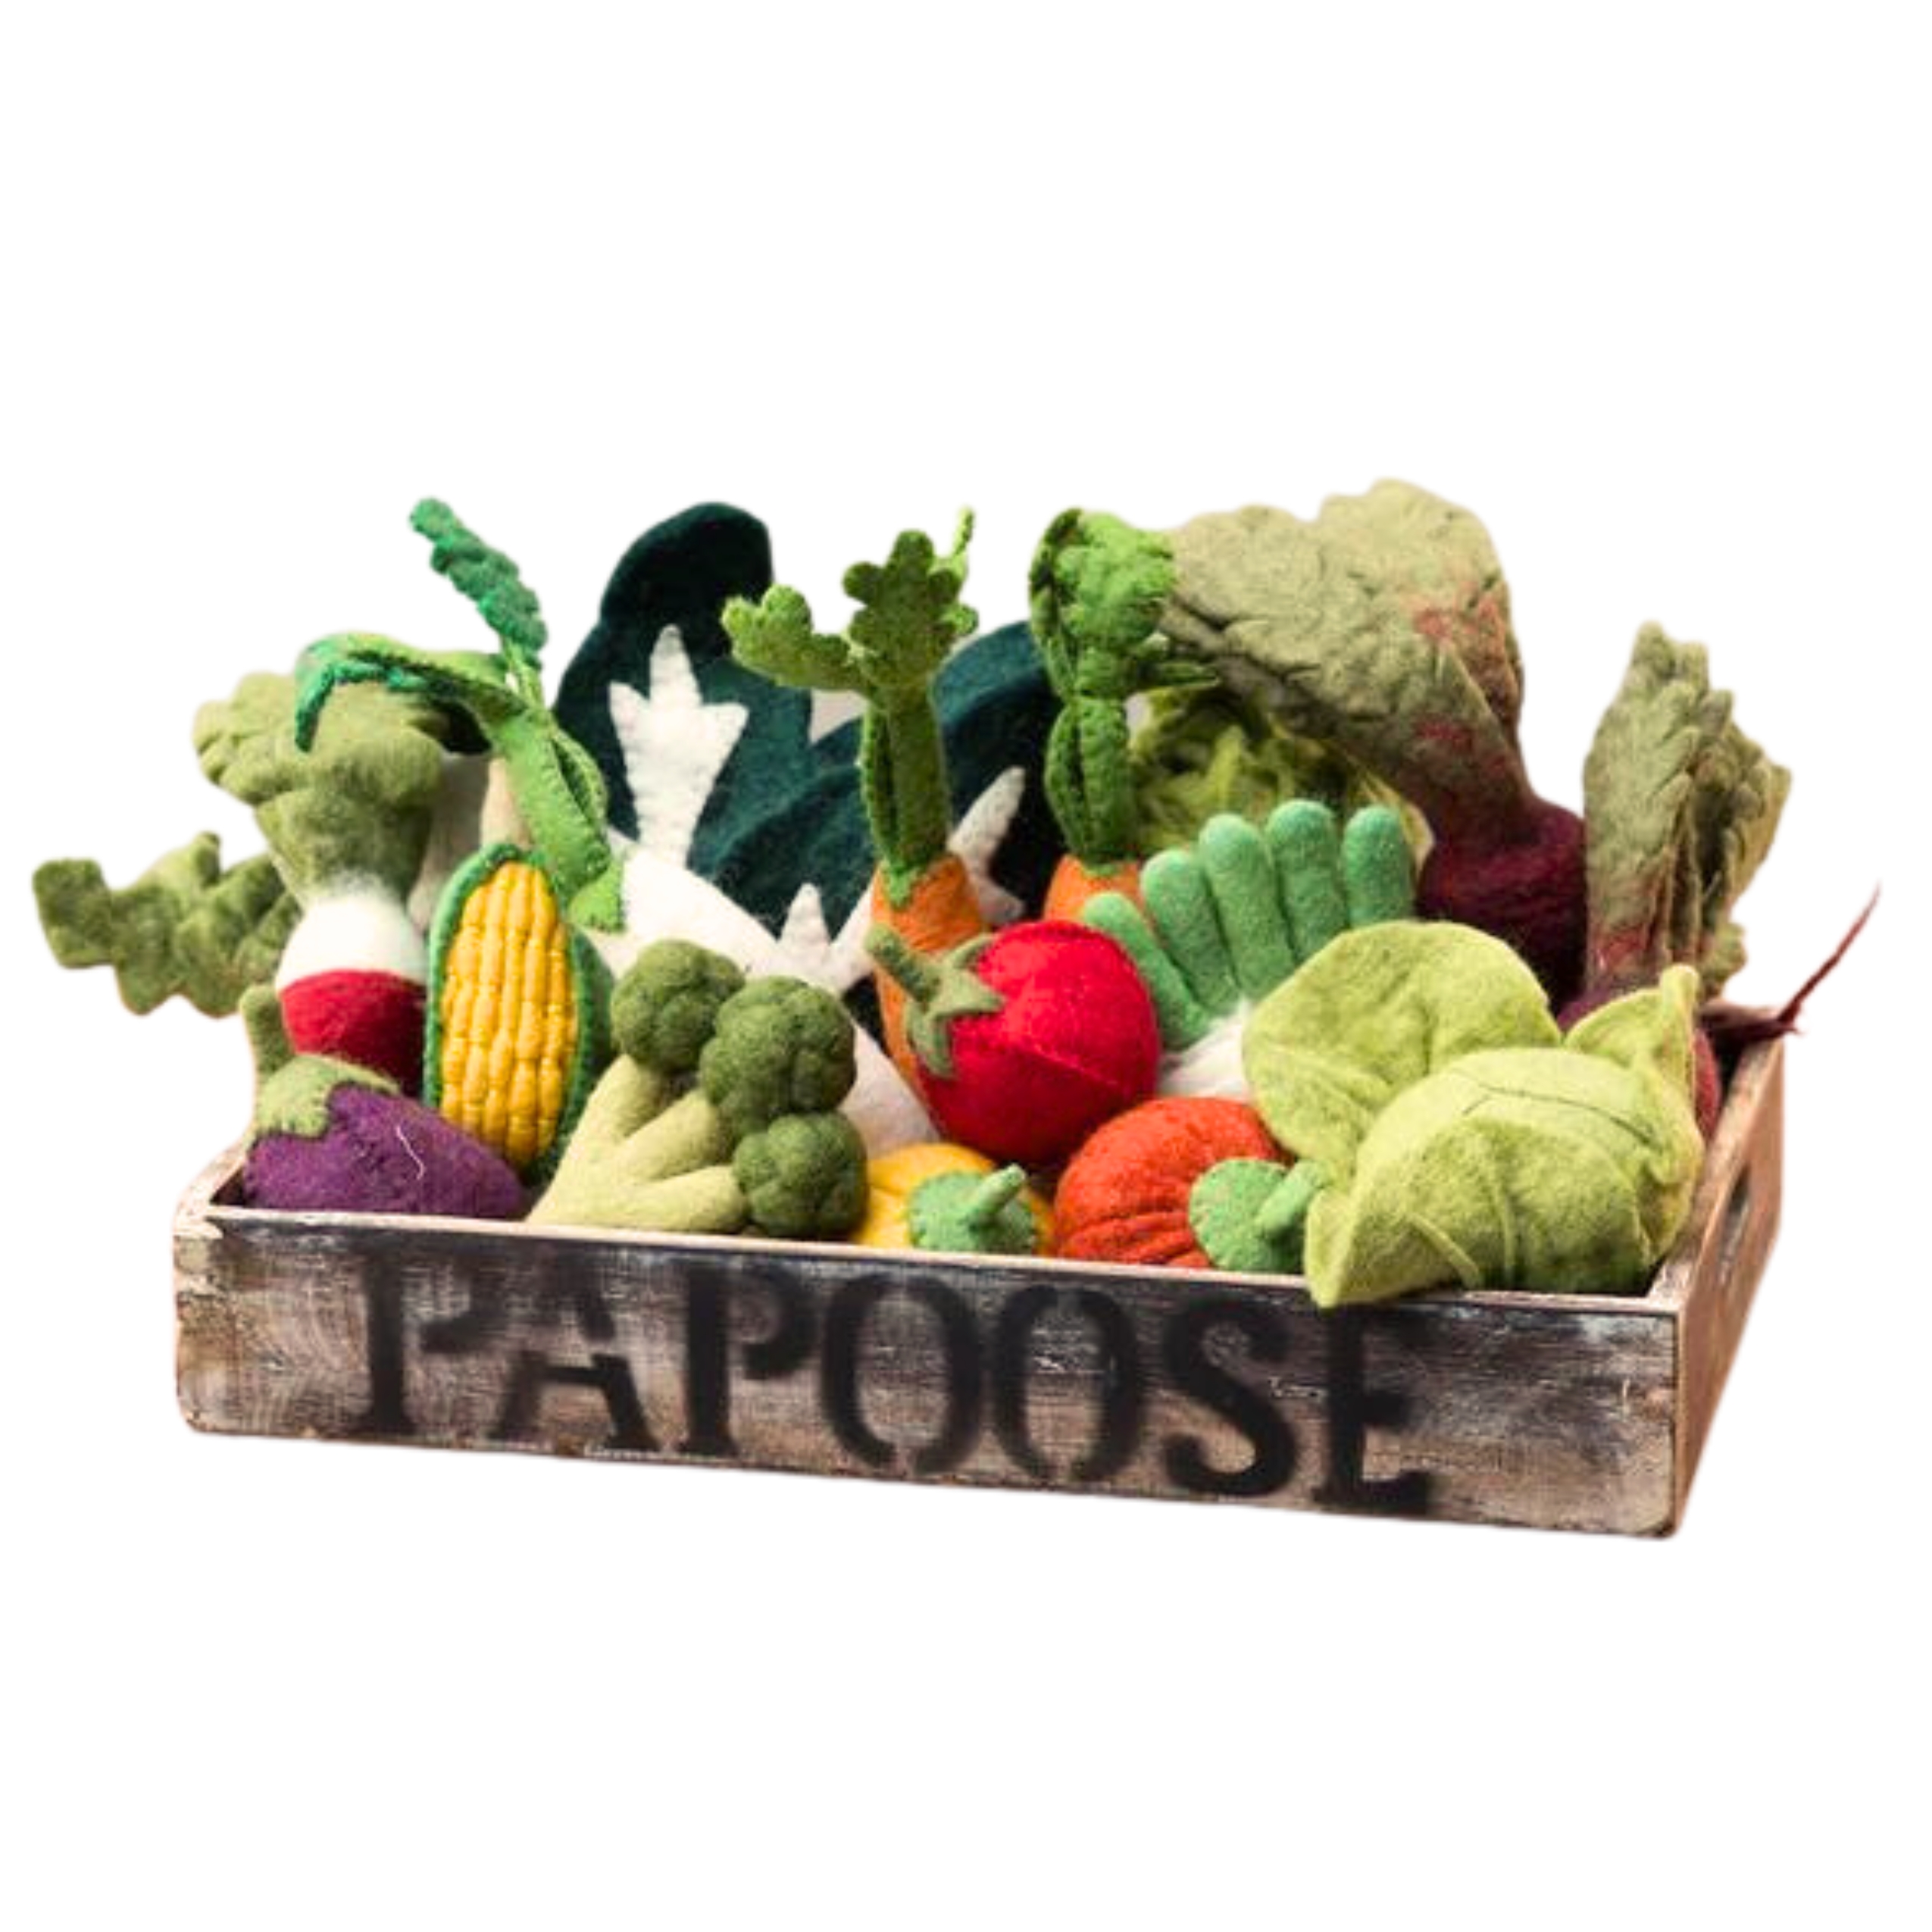 Food - Crate with Vegetables  